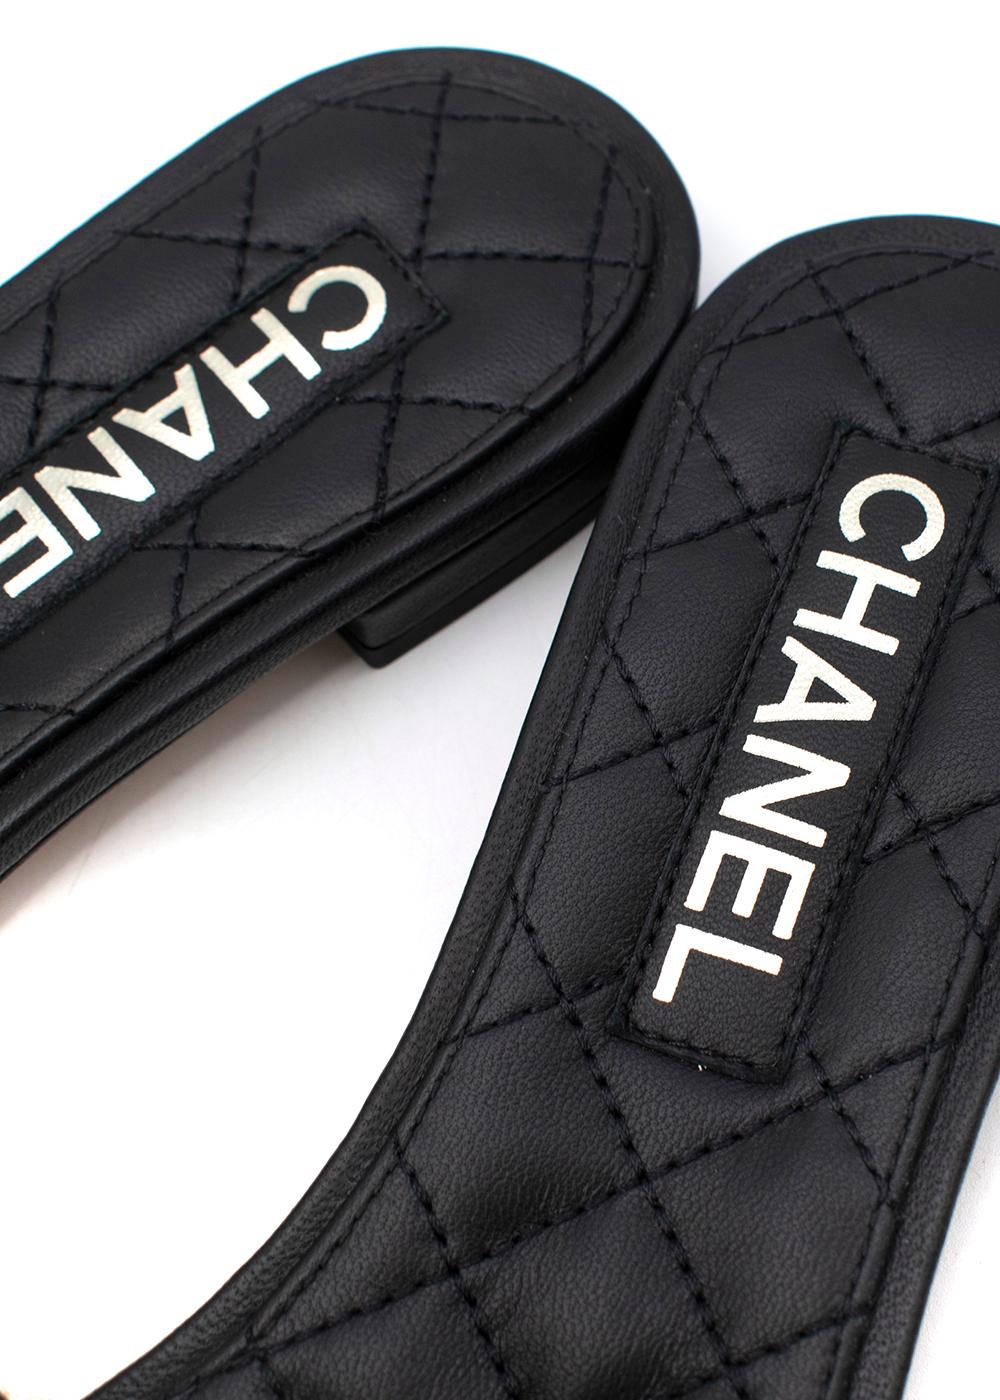 Chanel Faux-Pearl Embellished Sliders EU 37 In New Condition For Sale In London, GB